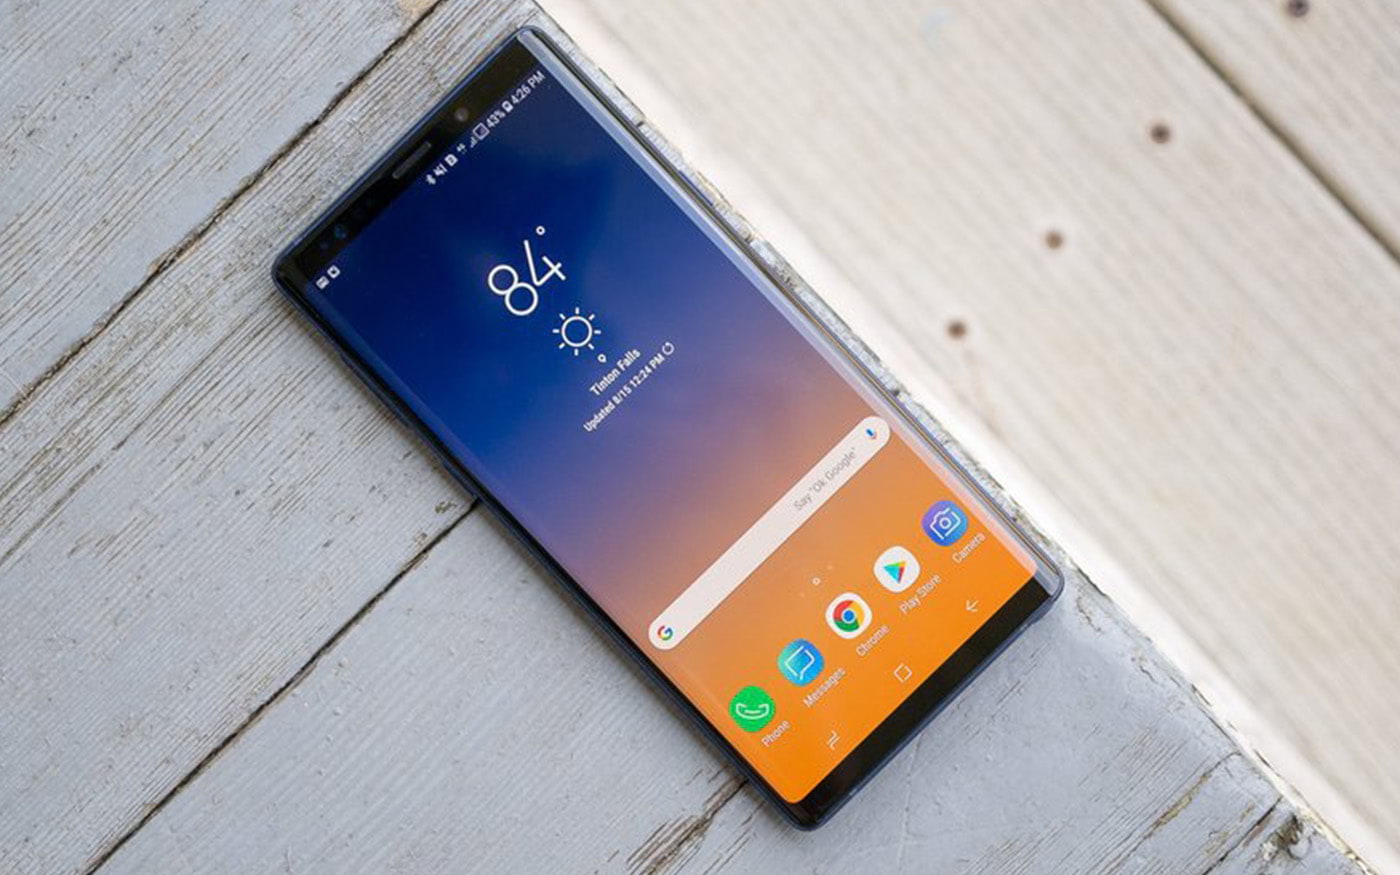 Galaxy Note 9 sold in Brazil receives February security patch